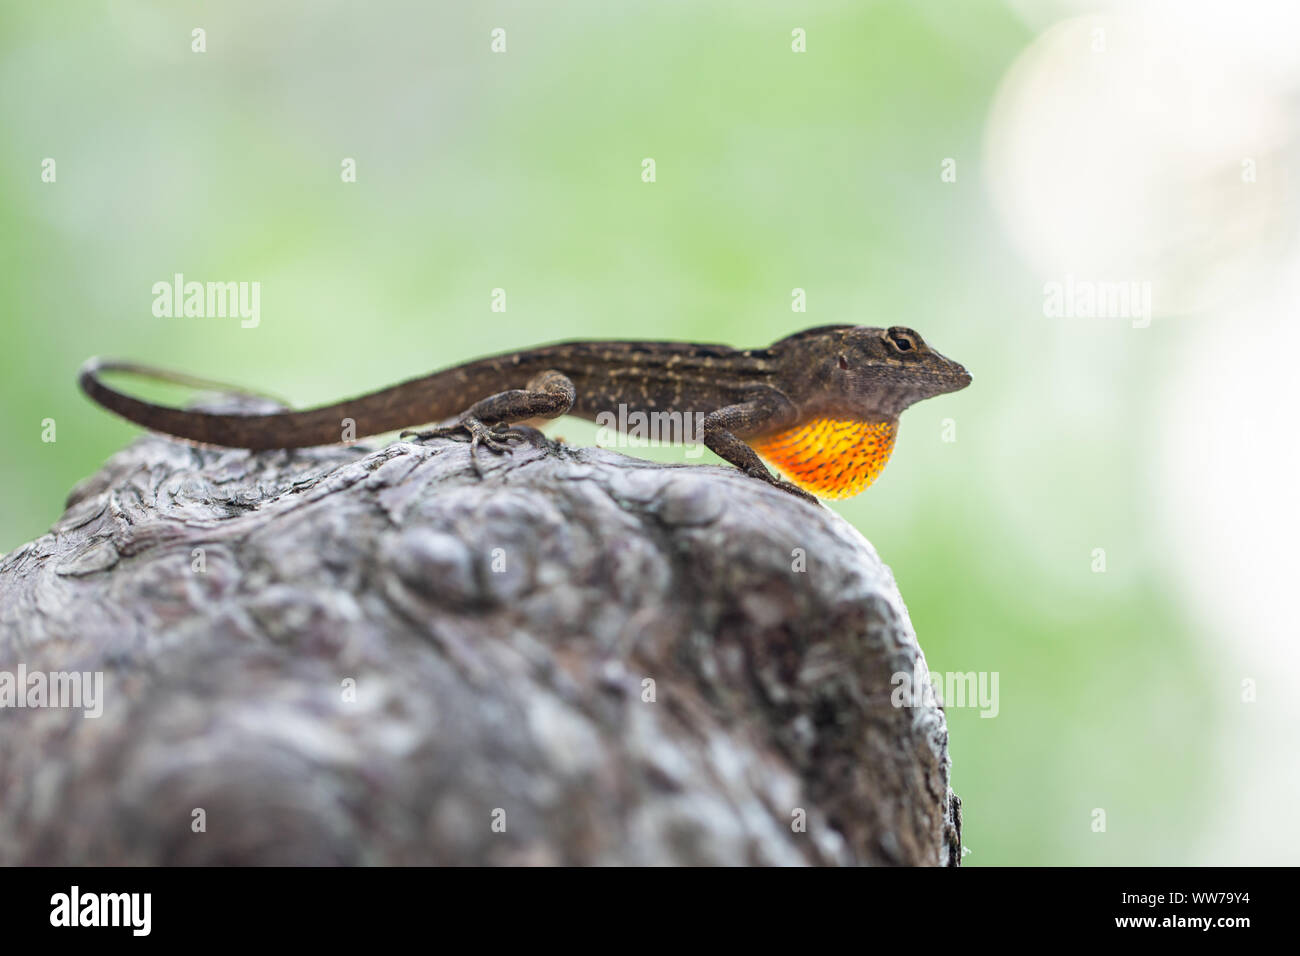 Male Cuban brown anole (Anolis sagrei) extending it's dewlap to attract a mate at A.L. Anderson Park, Tarpon Springs, Florida, USA. Stock Photo